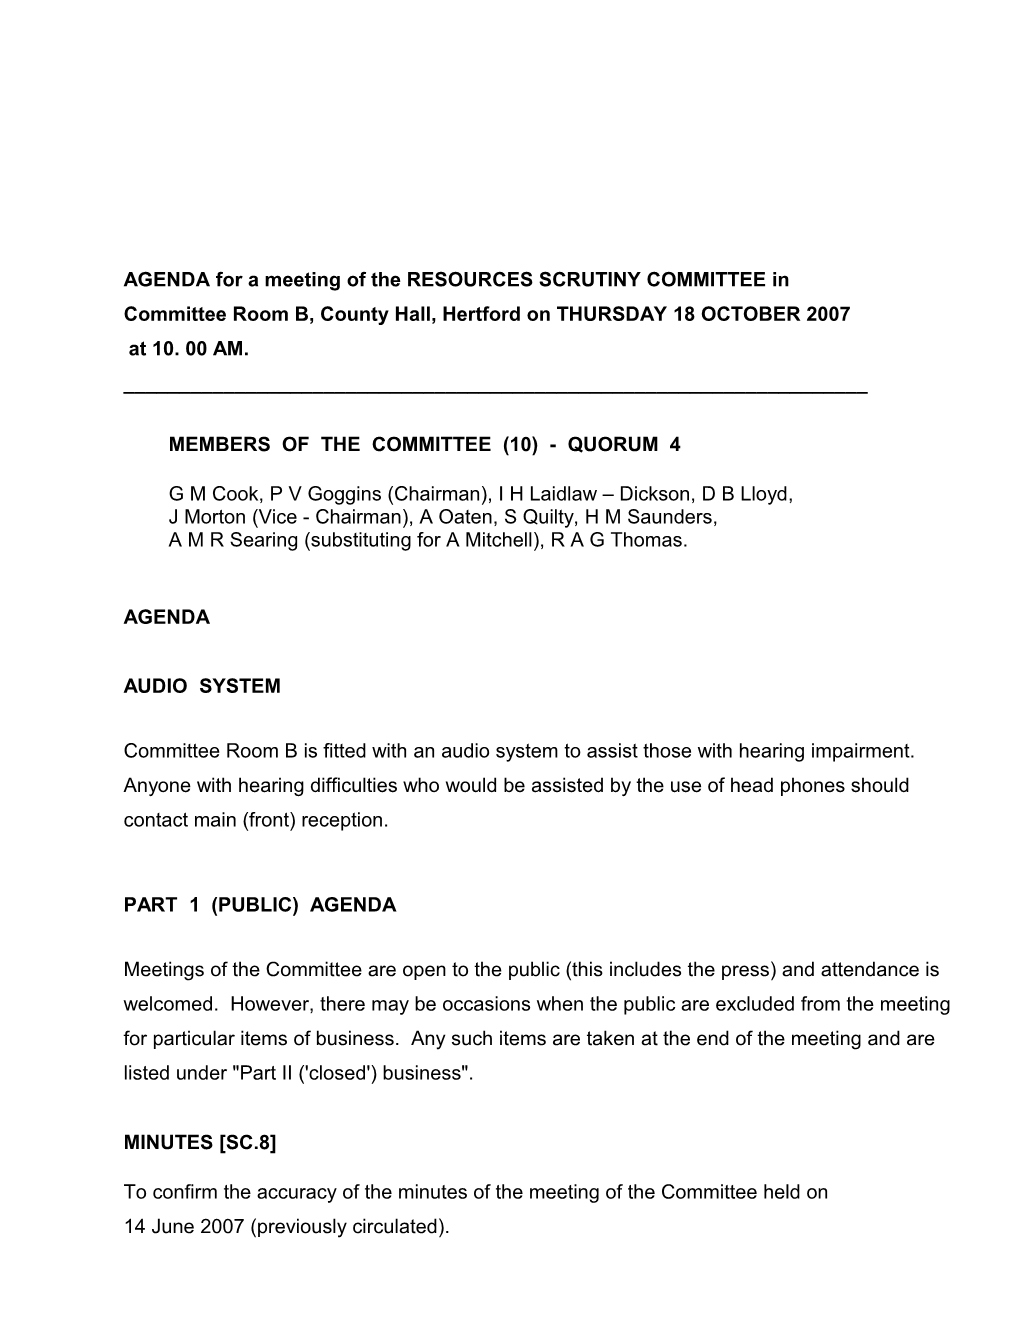 AGENDA for a Meeting of the RESOURCES SCRUTINY COMMITTEE In